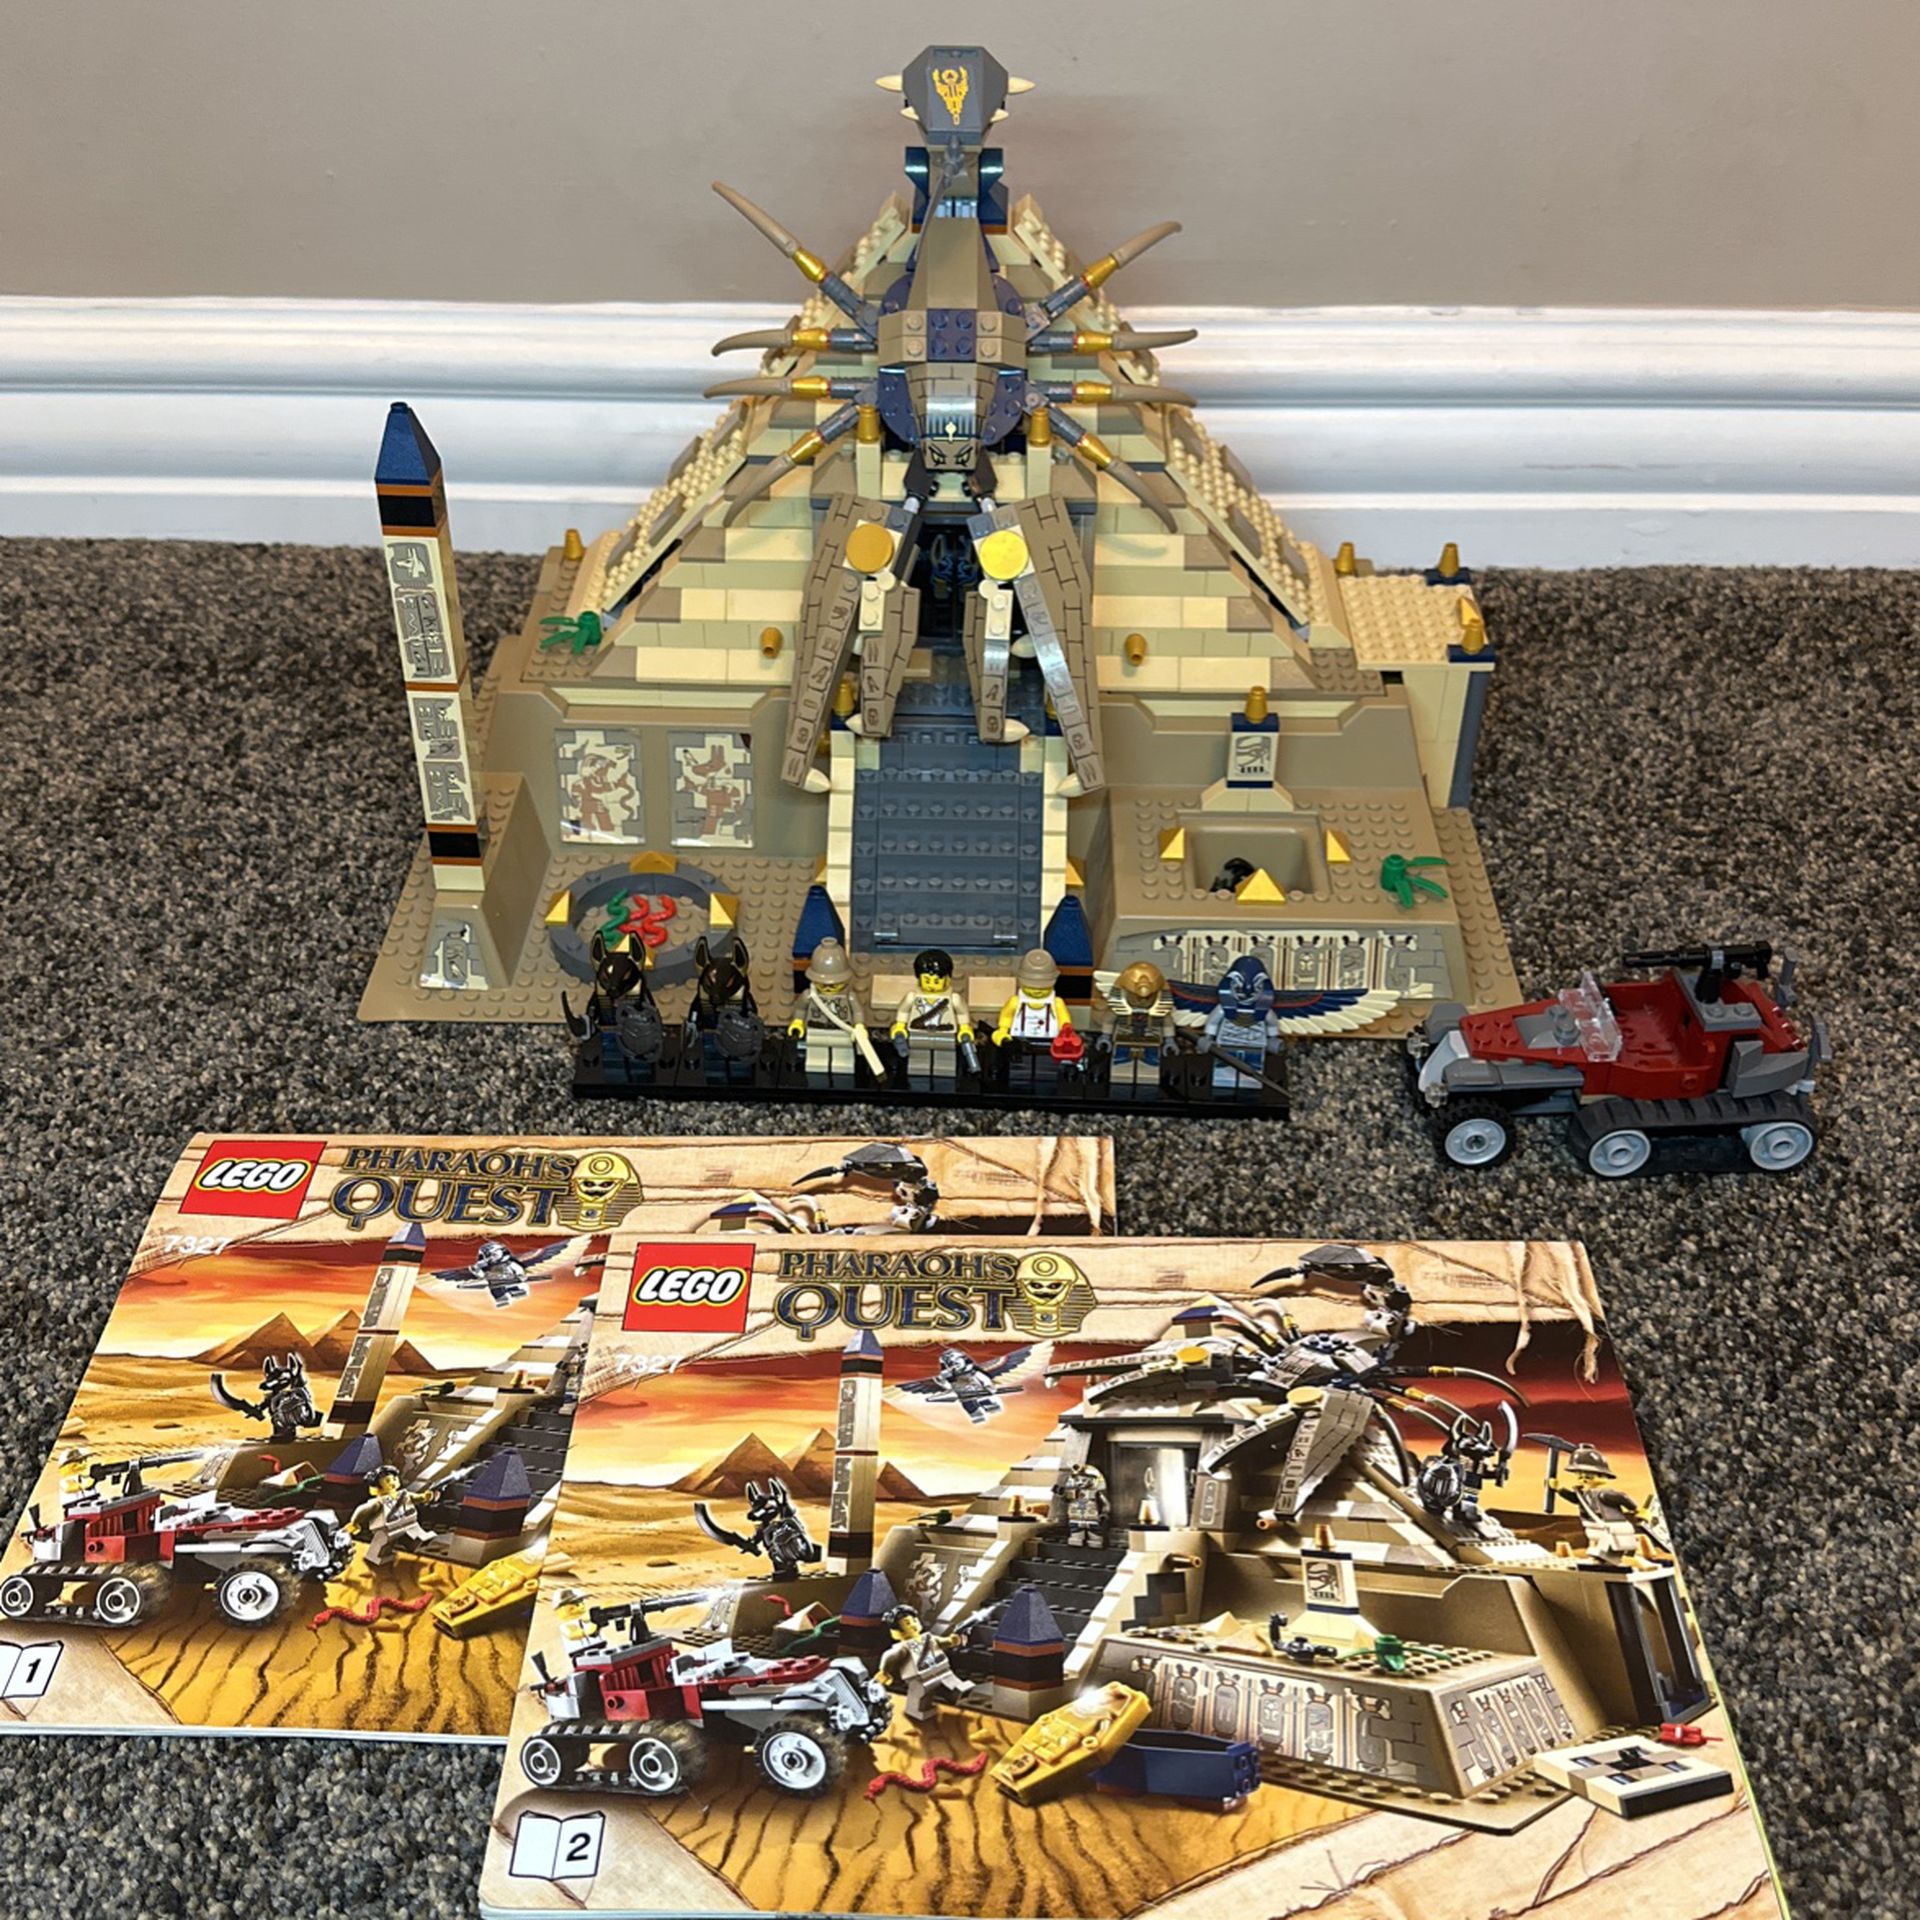 fintælling komplikationer melon LEGO Pharaohs Quest Scorpion Pyramid 7327 for Sale in Long Beach, CA -  OfferUp